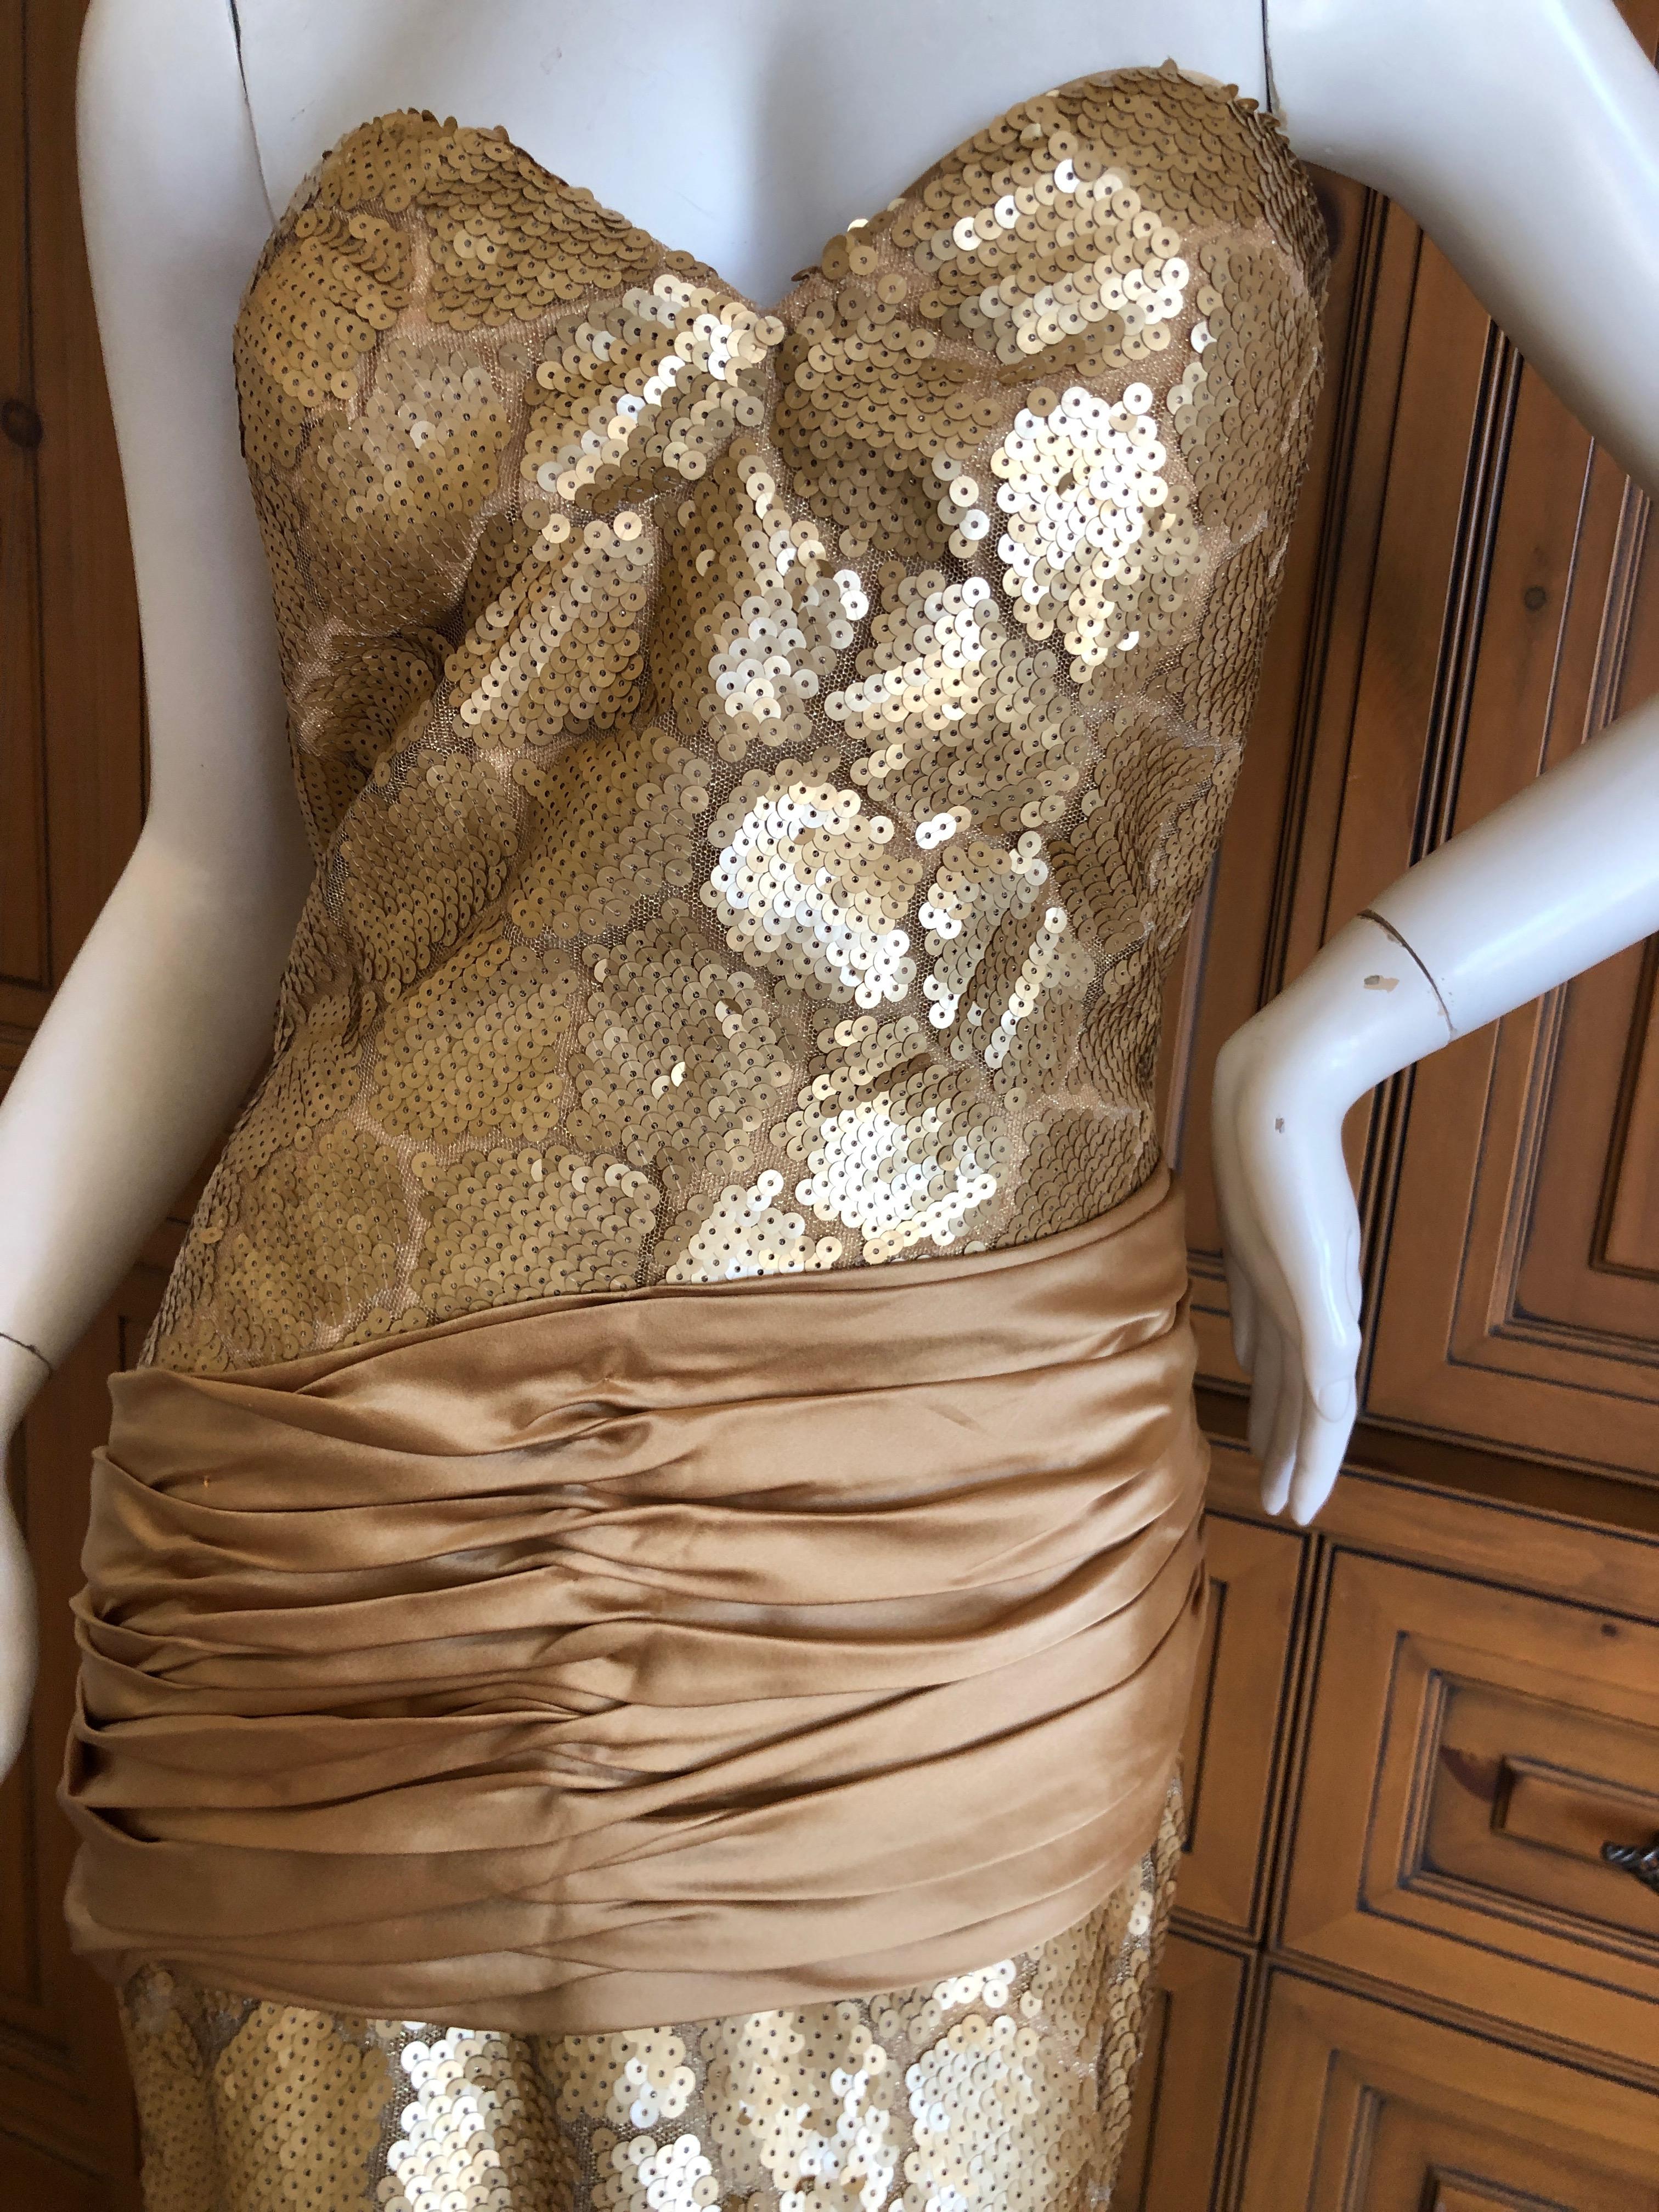 Women's Loris Azzaro Couture 1970s Sequin Accented Gold Dress with Waist Sash Train For Sale